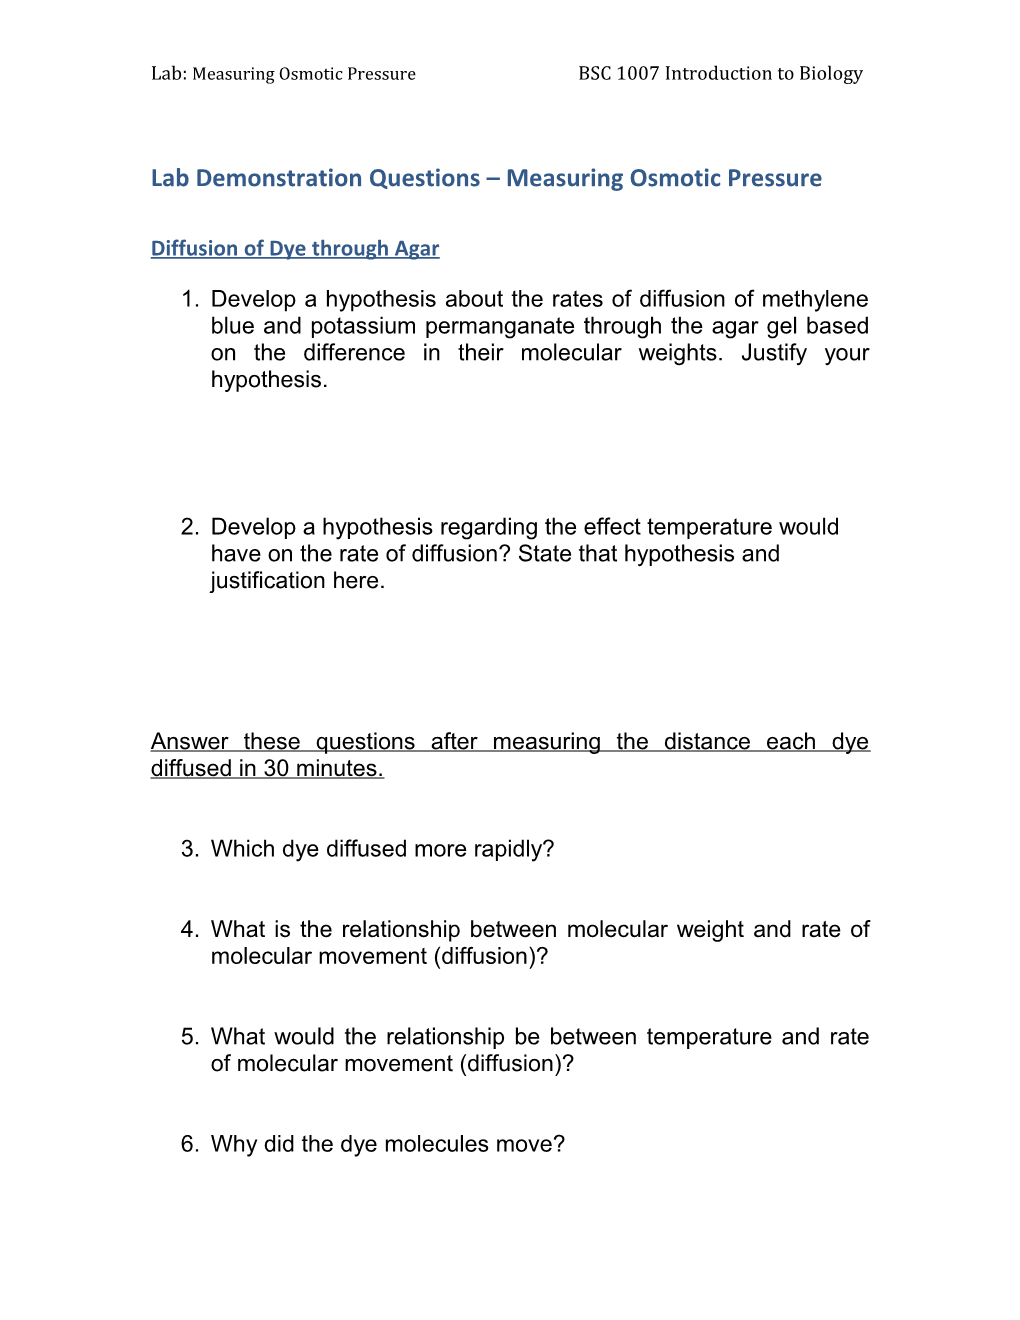 Lab Demonstration Questions Measuring Osmotic Pressure